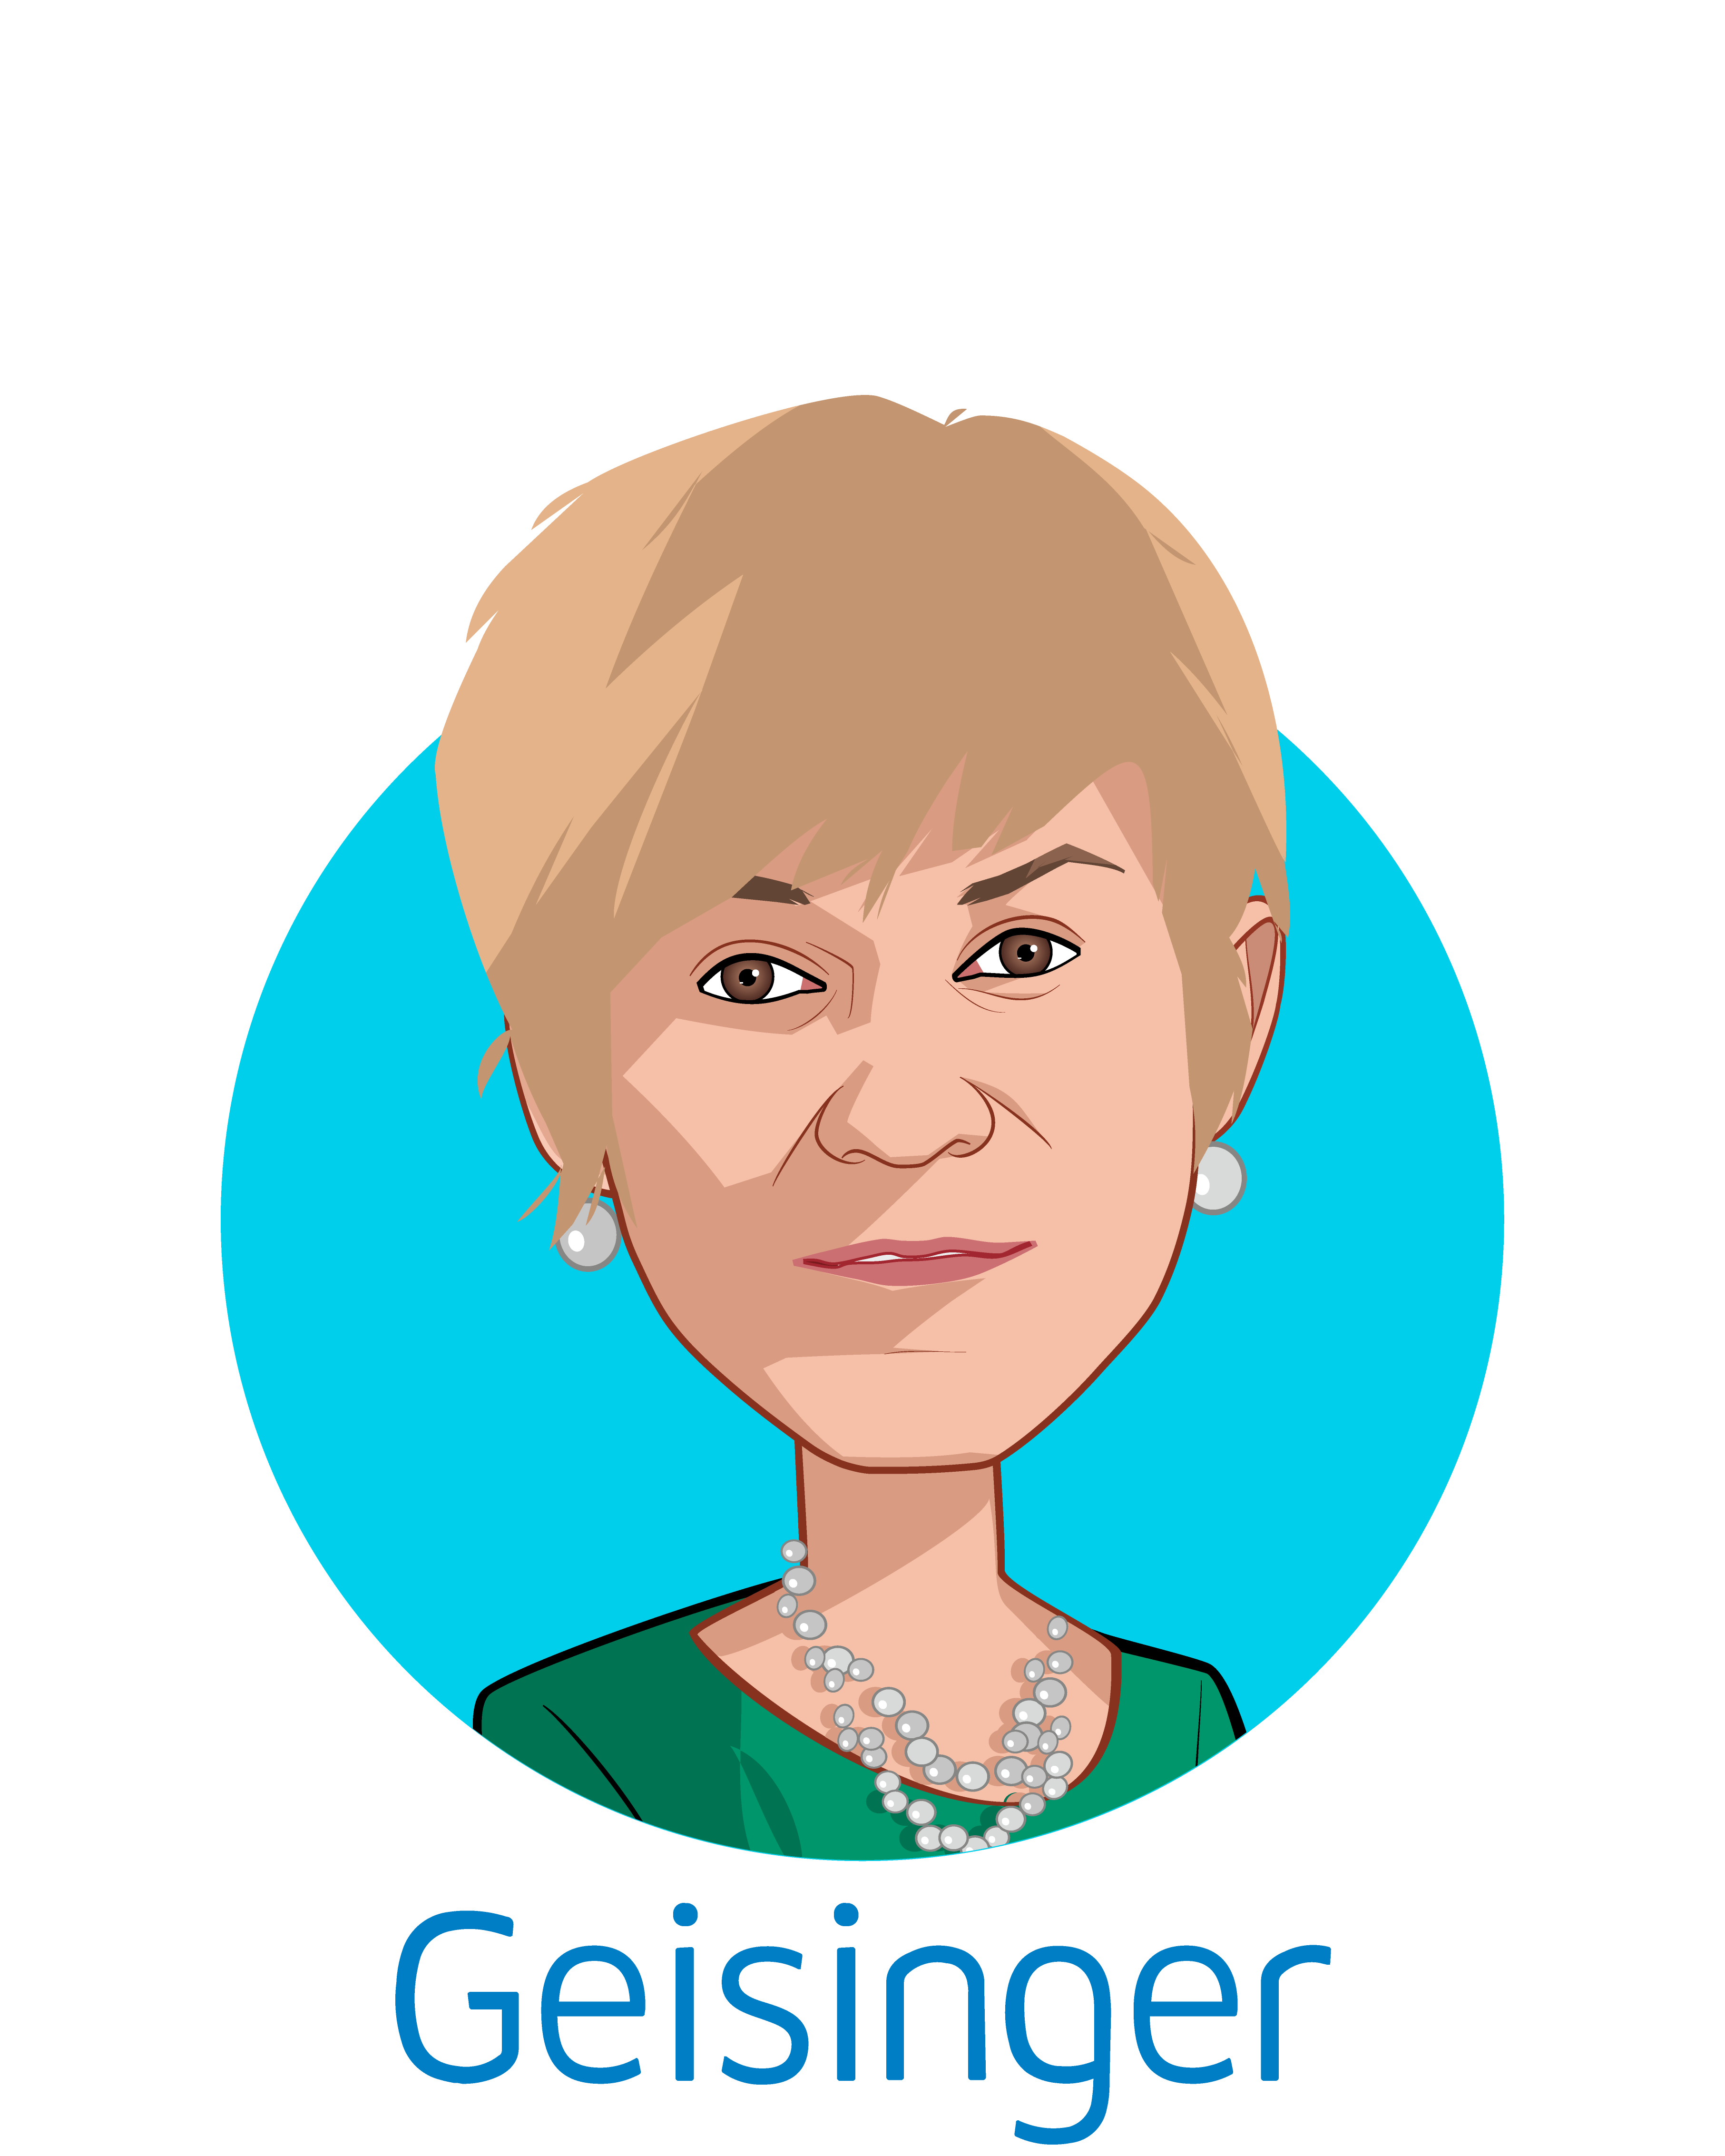 Main caricature of Karen M. Murphy, PhD, RN, who is speaking at HLTH and is EVP/Chief Innovation Officer at Geisinger